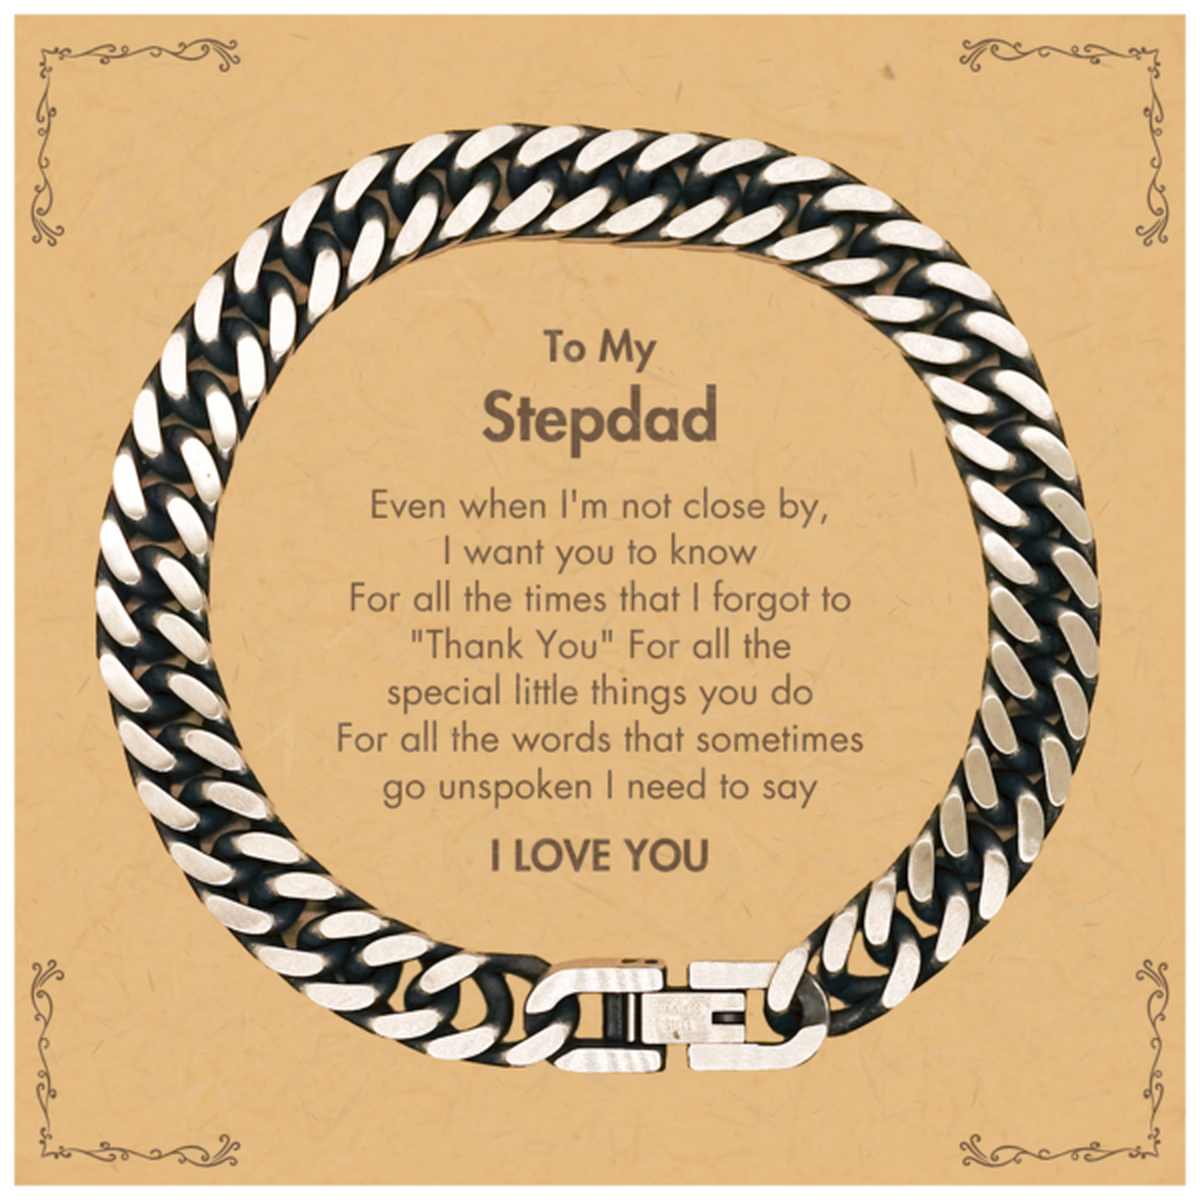 Thank You Gifts for Stepdad, Keepsake Cuban Link Chain Bracelet Gifts for Stepdad Birthday Mother's day Father's Day Stepdad For all the words That sometimes go unspoken I need to say I LOVE YOU